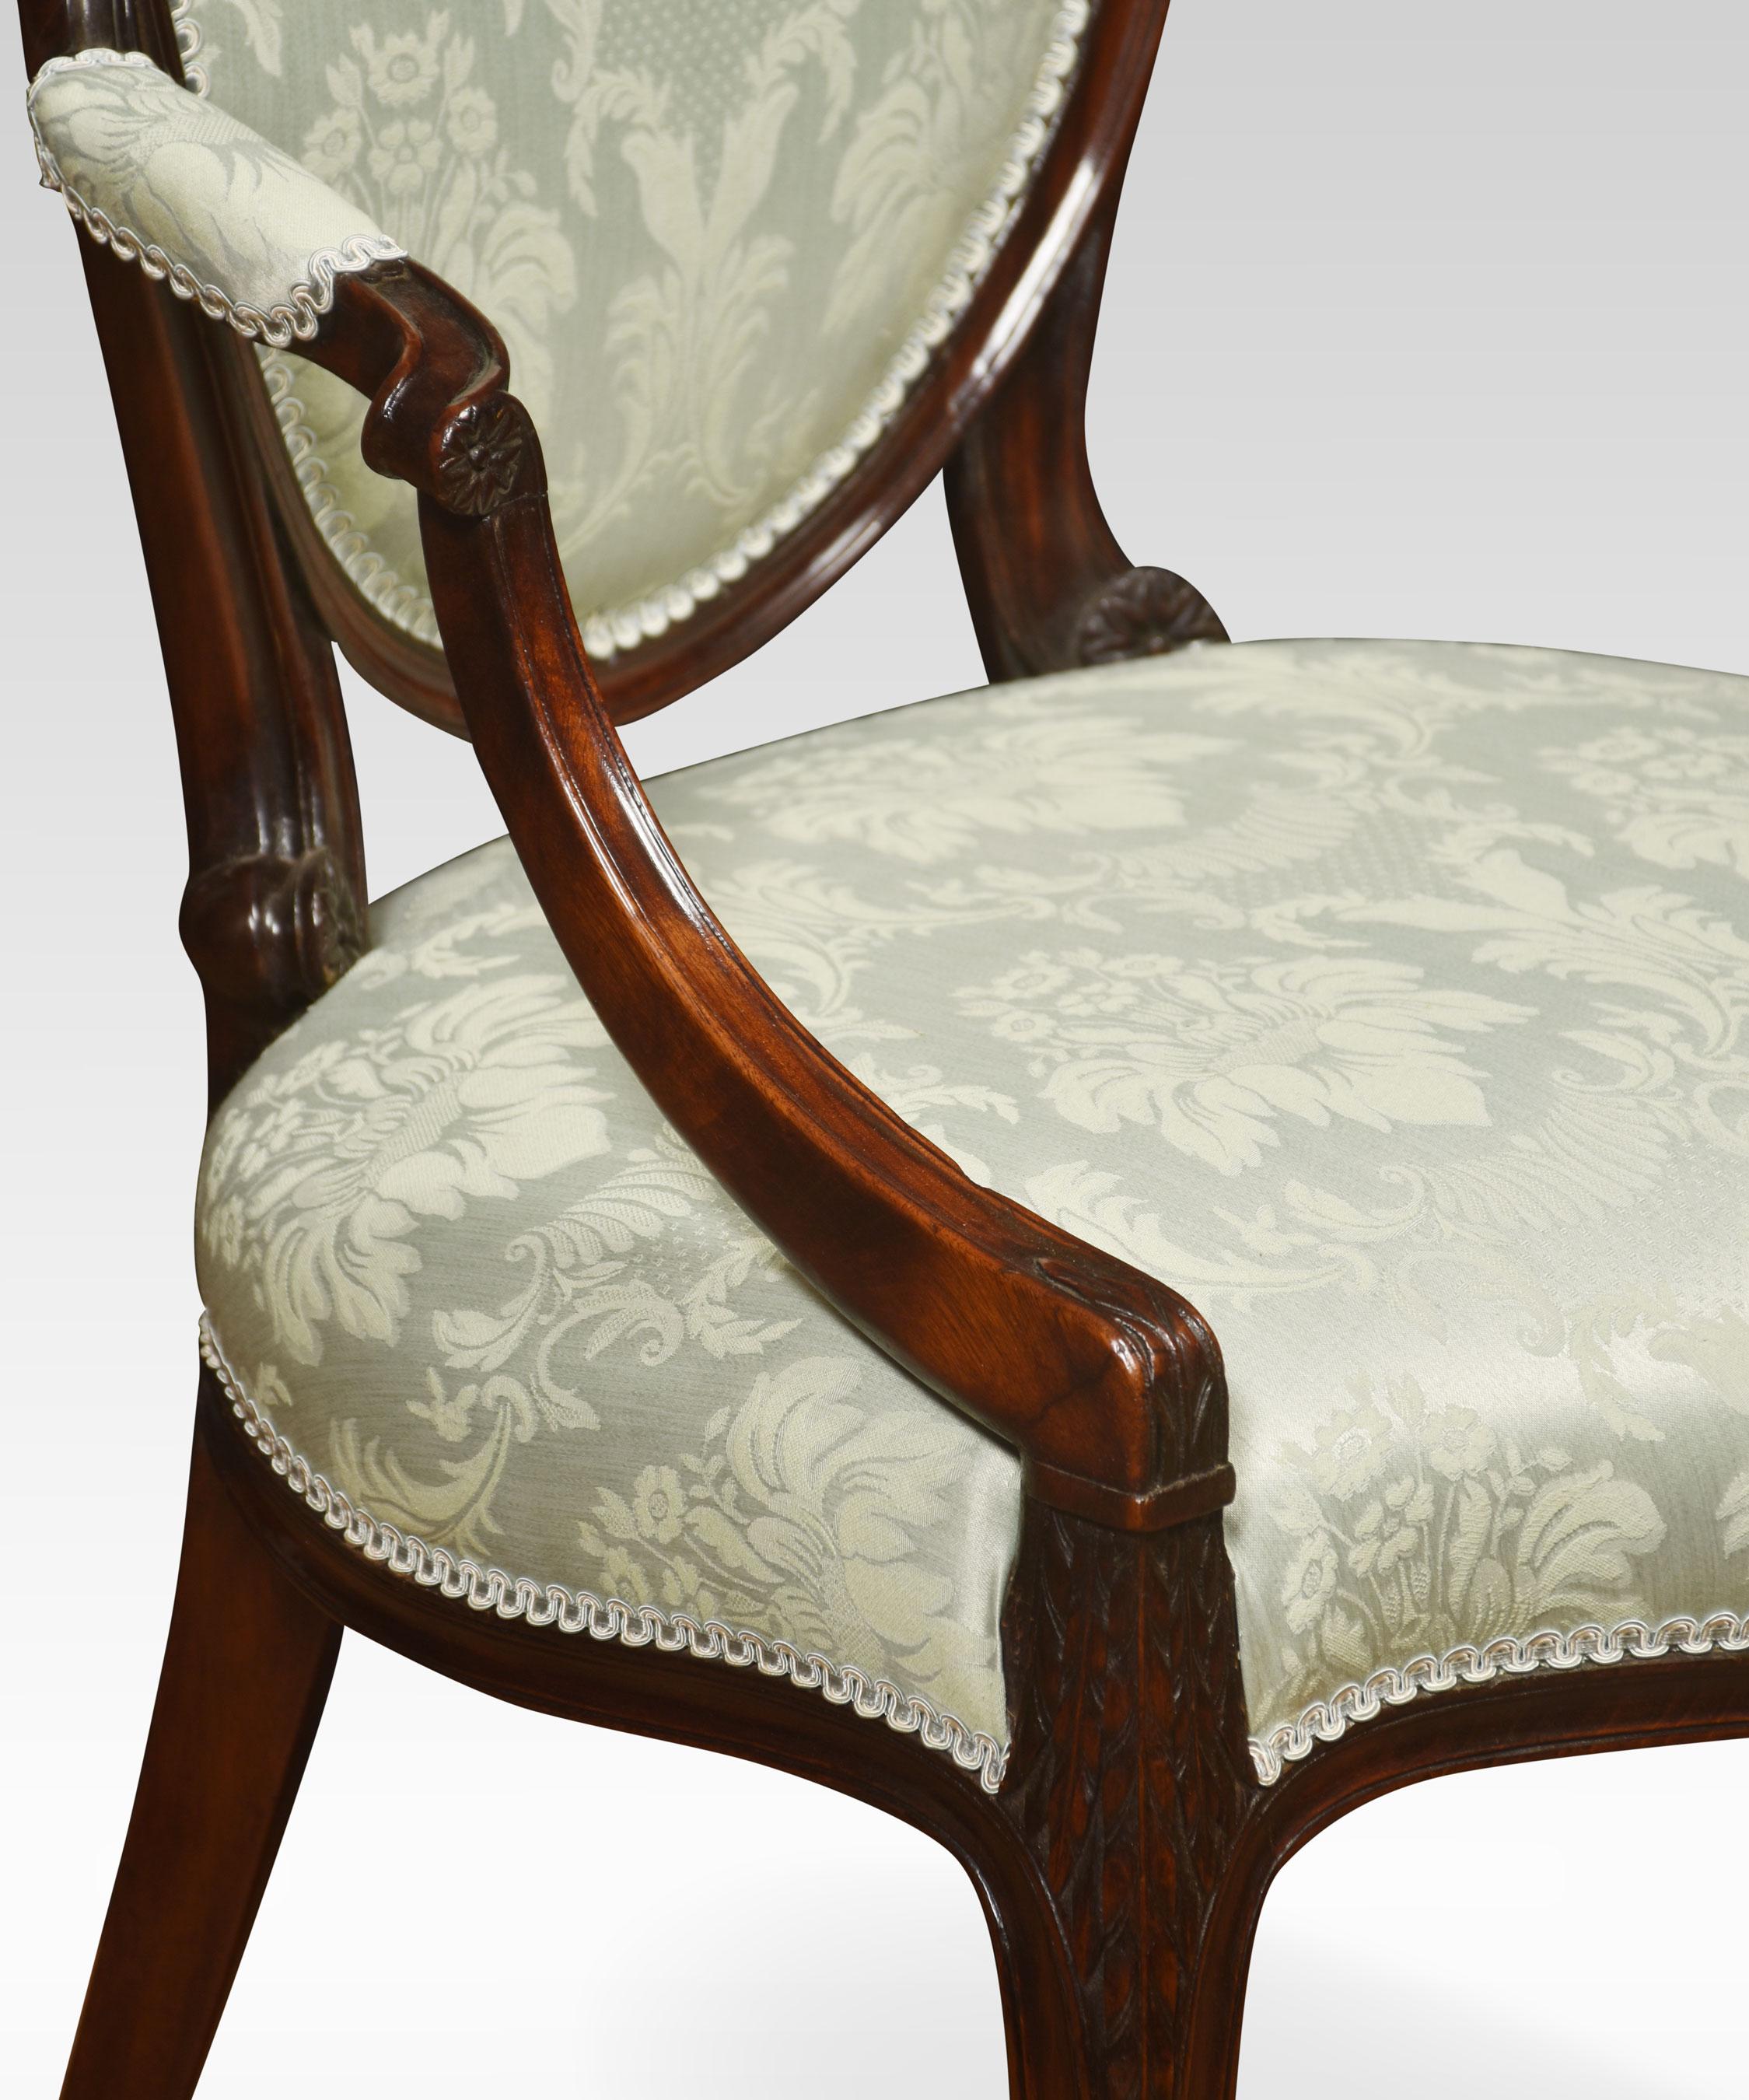 Pair of Hepplewhite style mahogany armchairs, the oval backs and out-swept arms upholstered in green damask fabric raised up on slender cabriolet supports.
Dimensions
Height 40 Inches height to seat 18.5 Inches
Width 24 Inches
Depth 23 Inches.